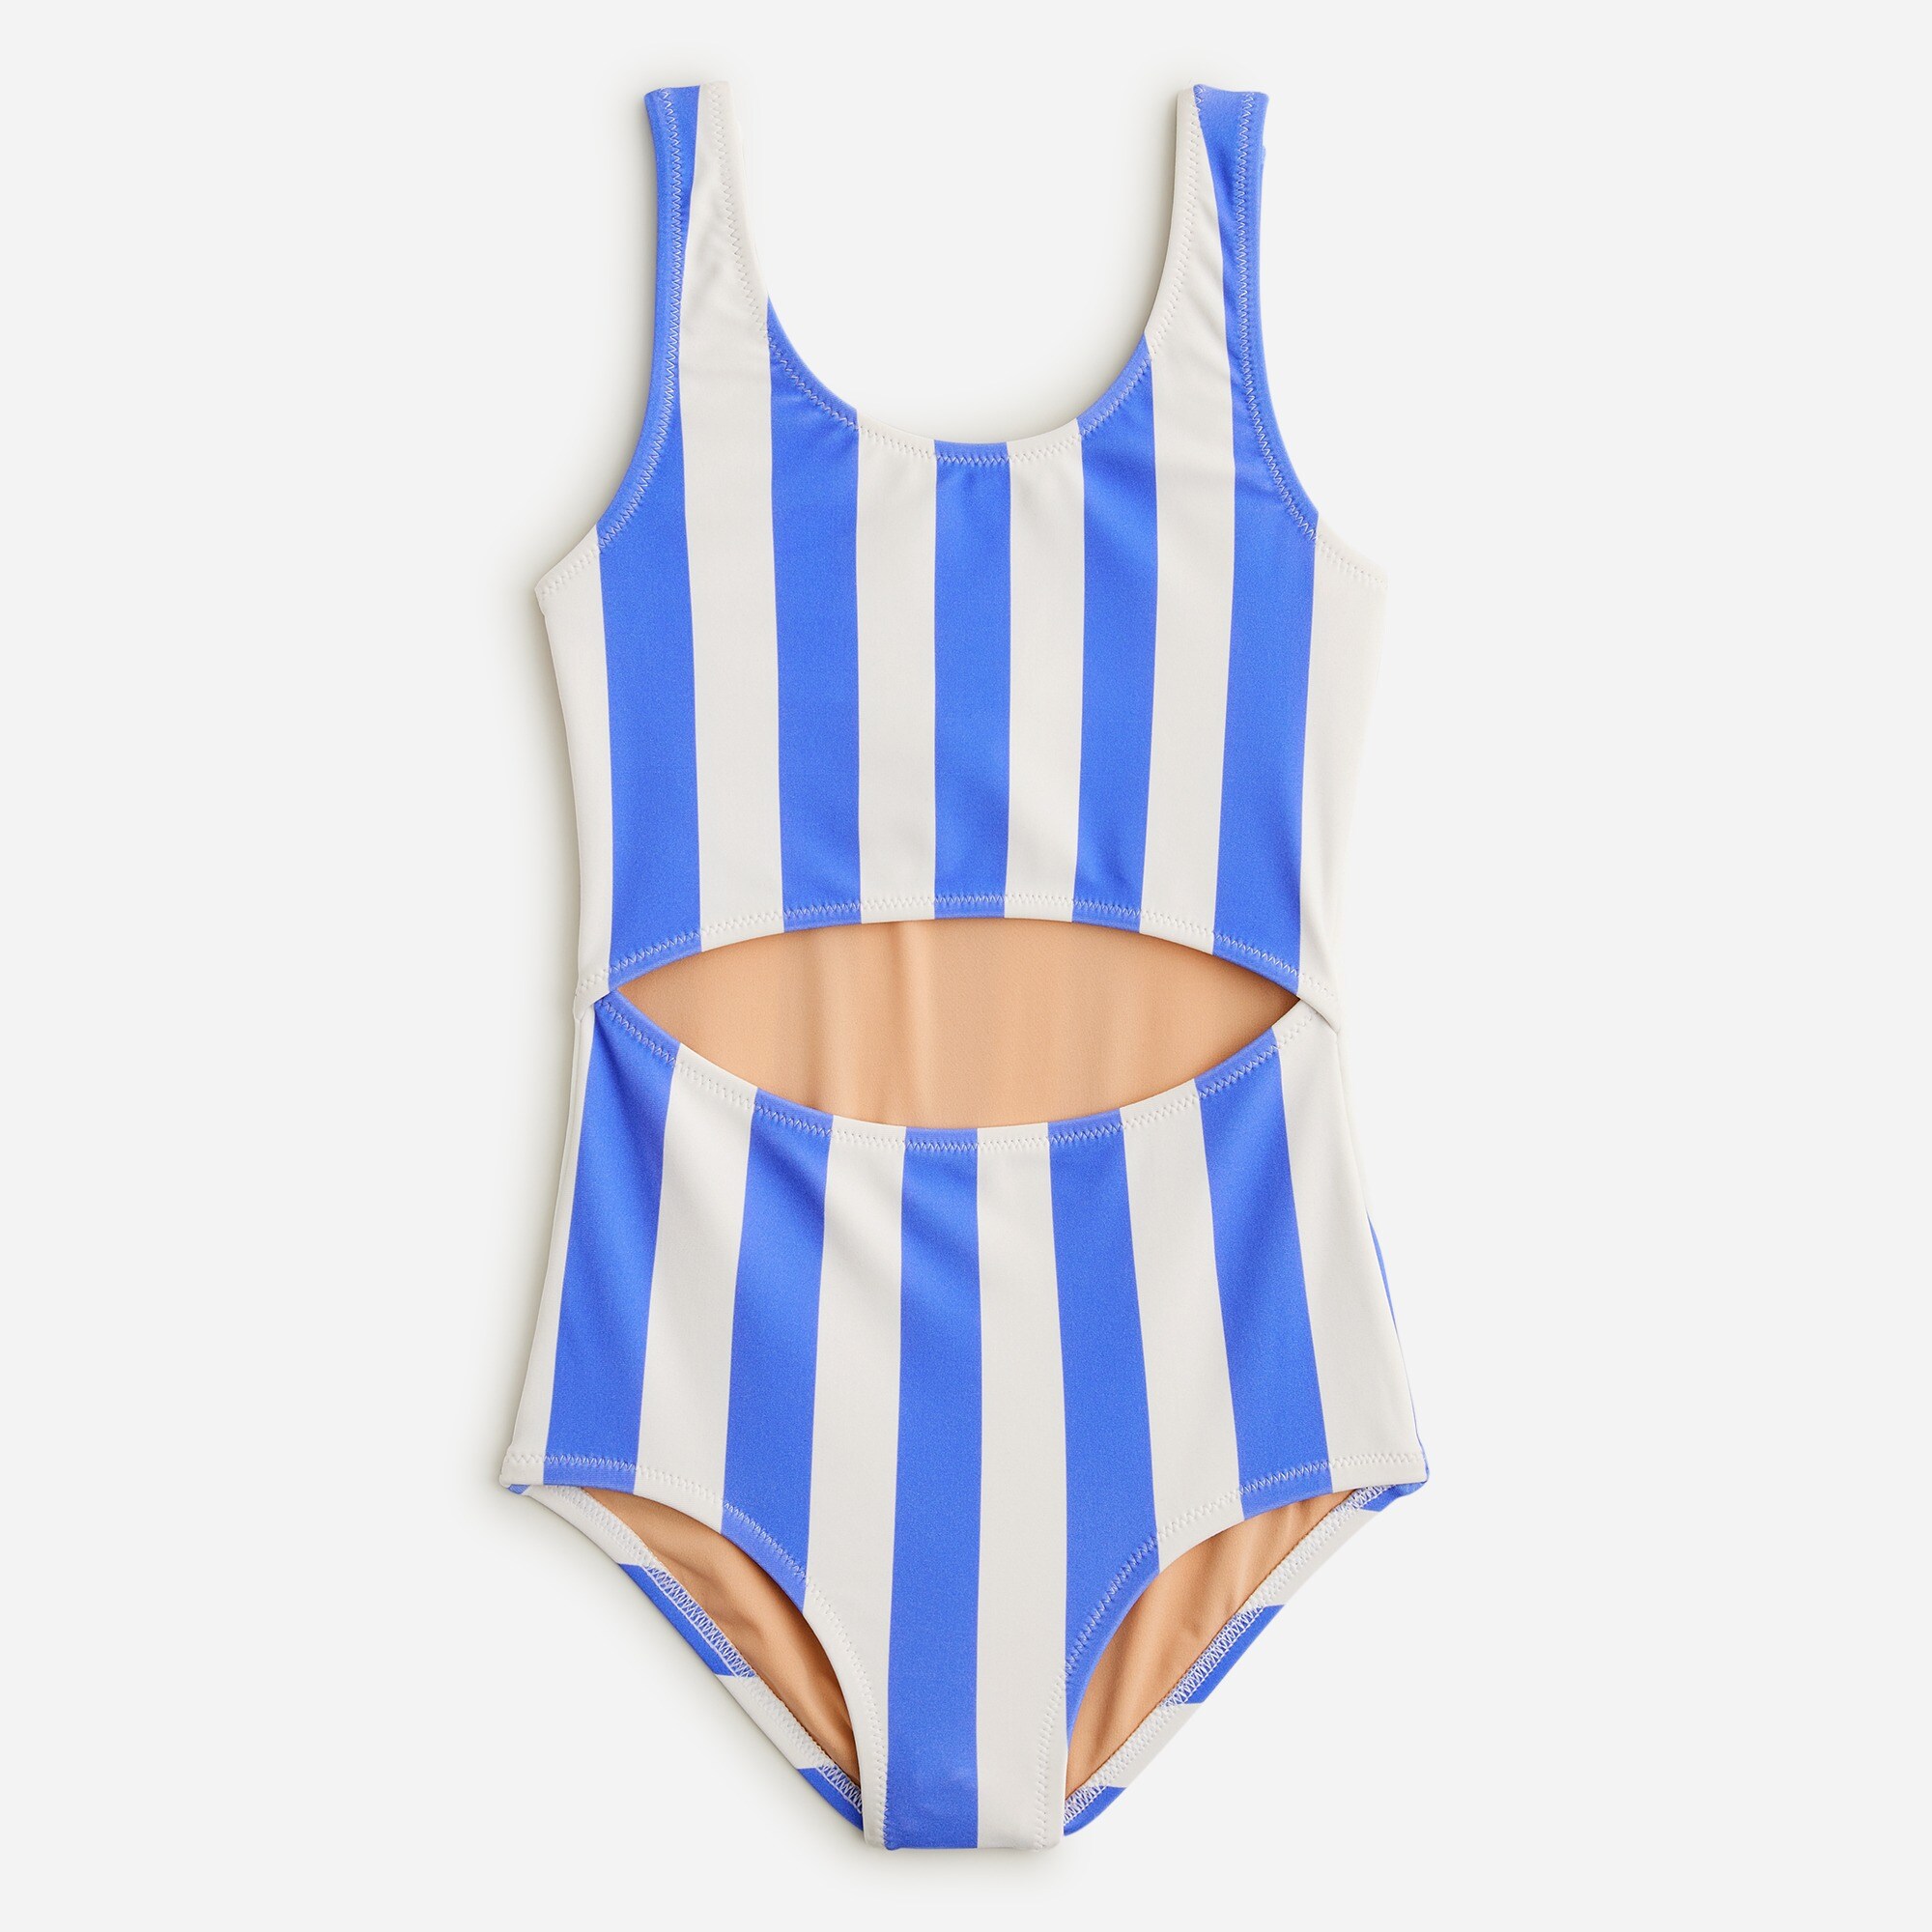  Girls' printed cutout-waist one-piece swimsuit with UPF 50+